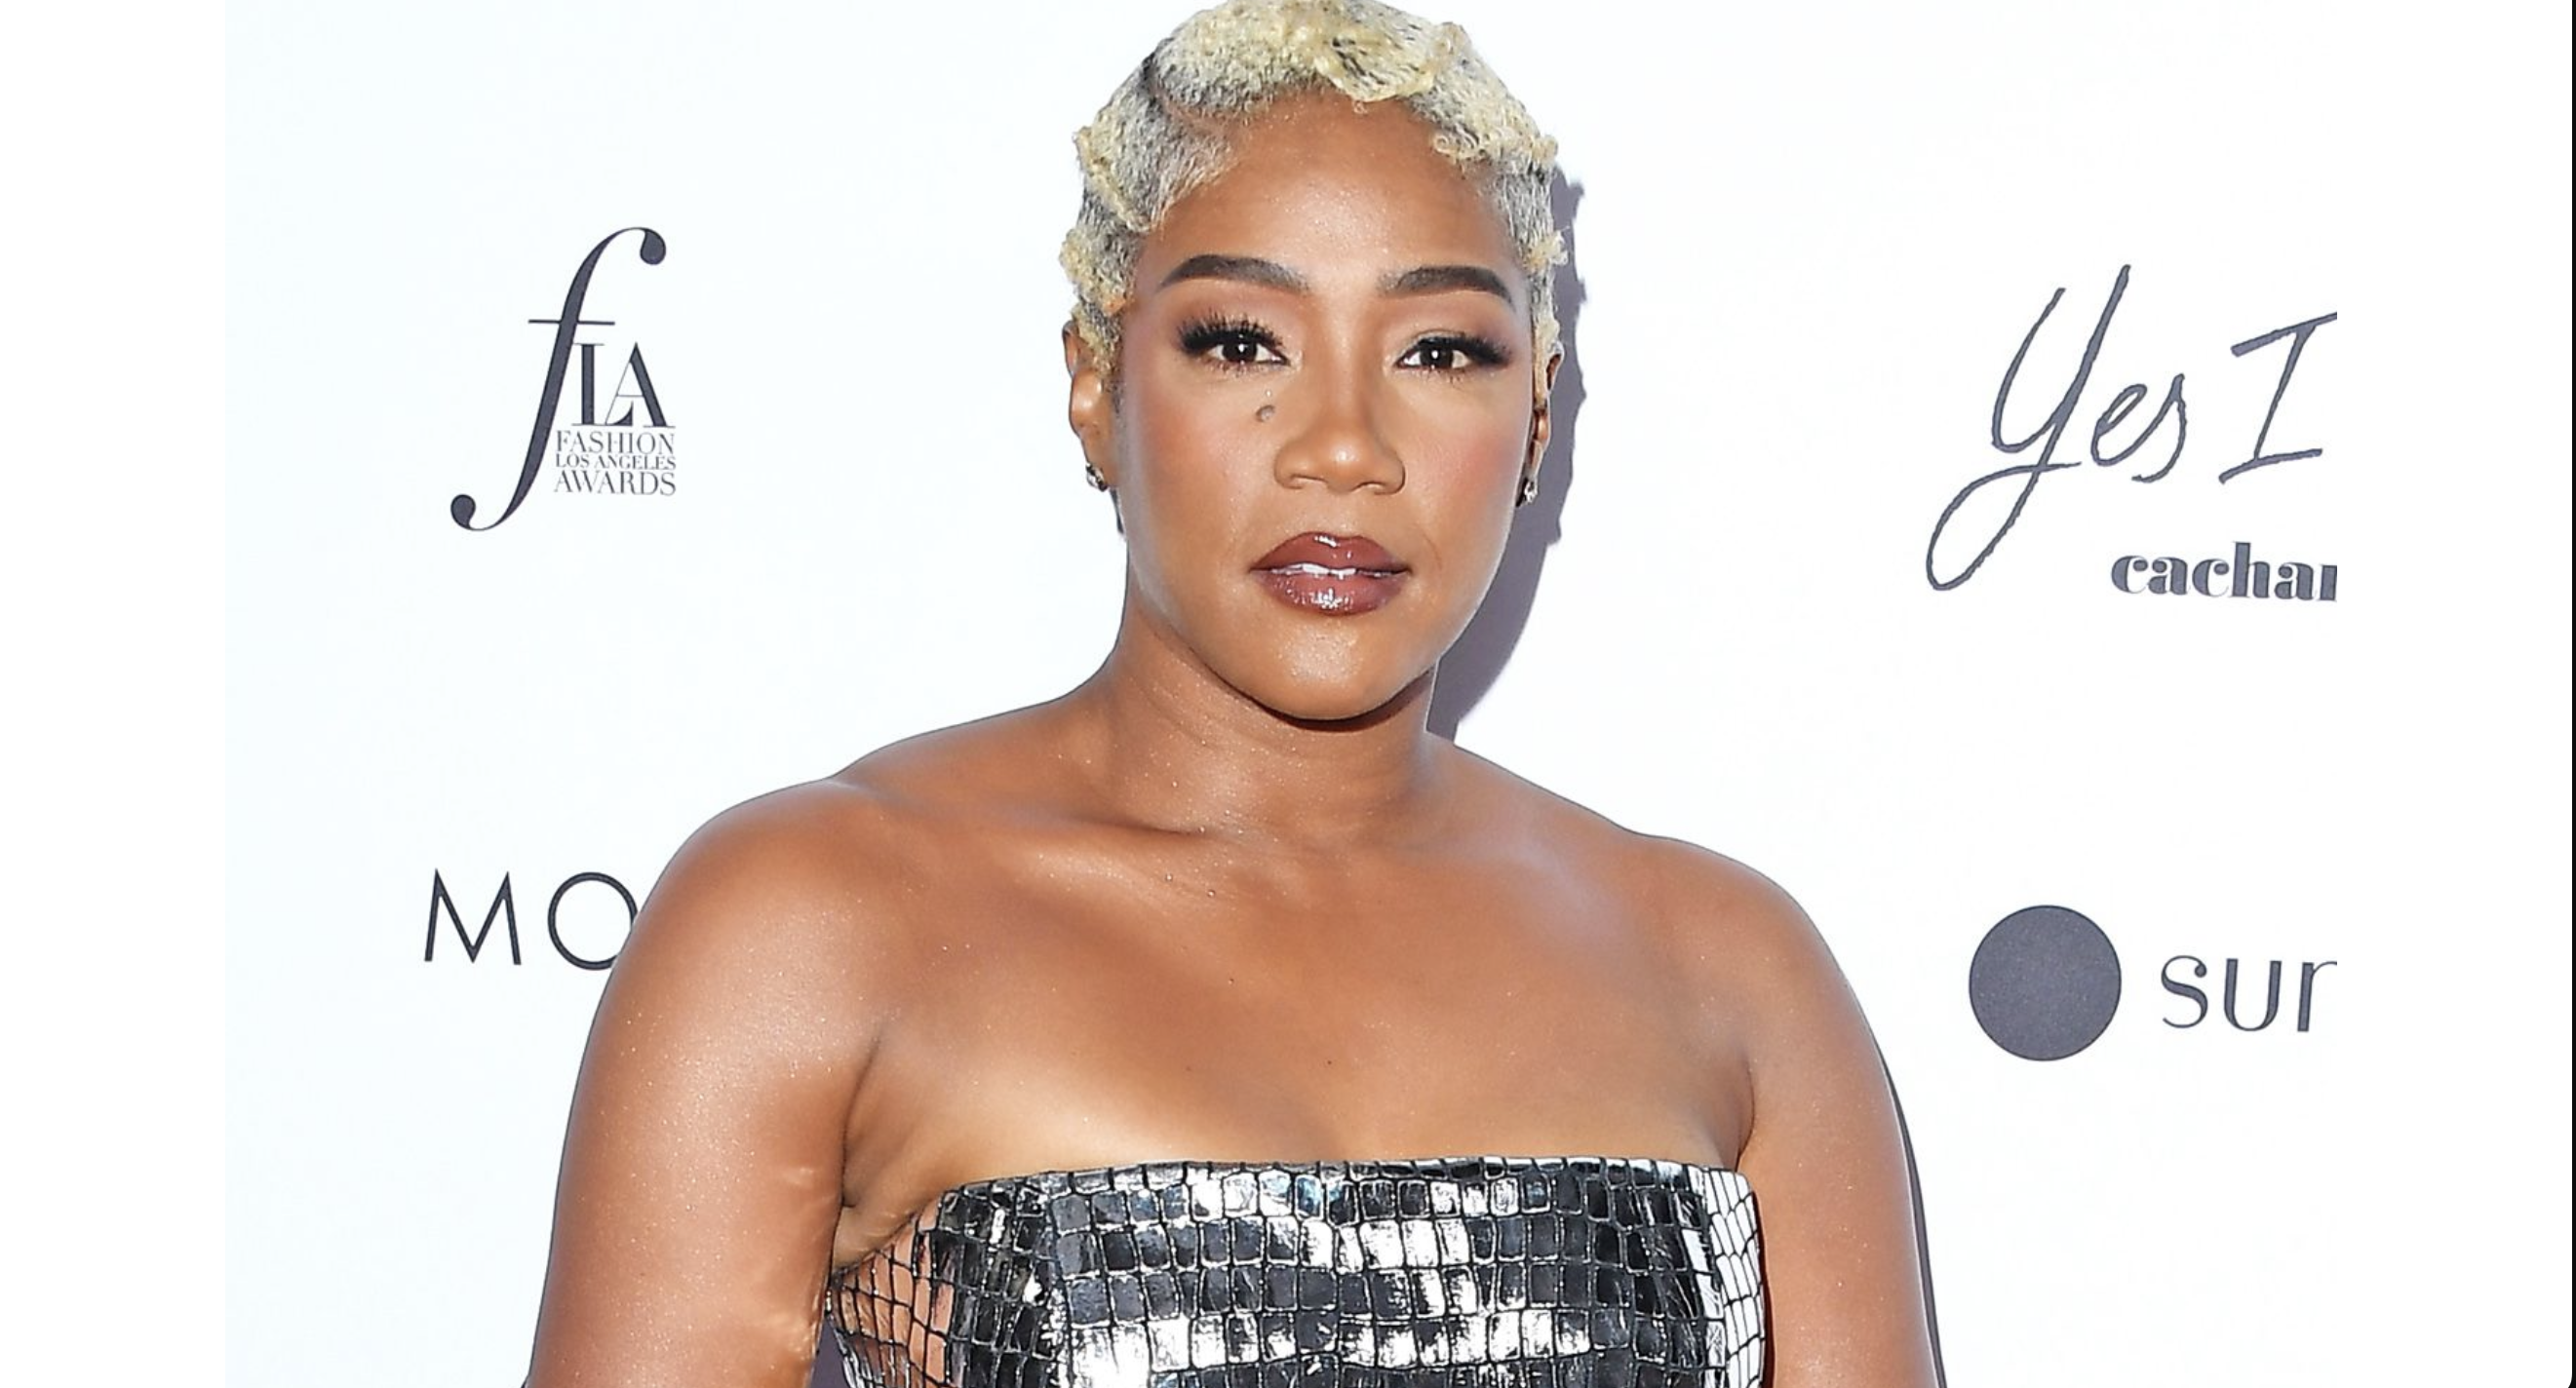 Tiffany Haddish was taken into custody on suspicion of driving under the influence following an incident where she reportedly dozed off while behind the wheel.